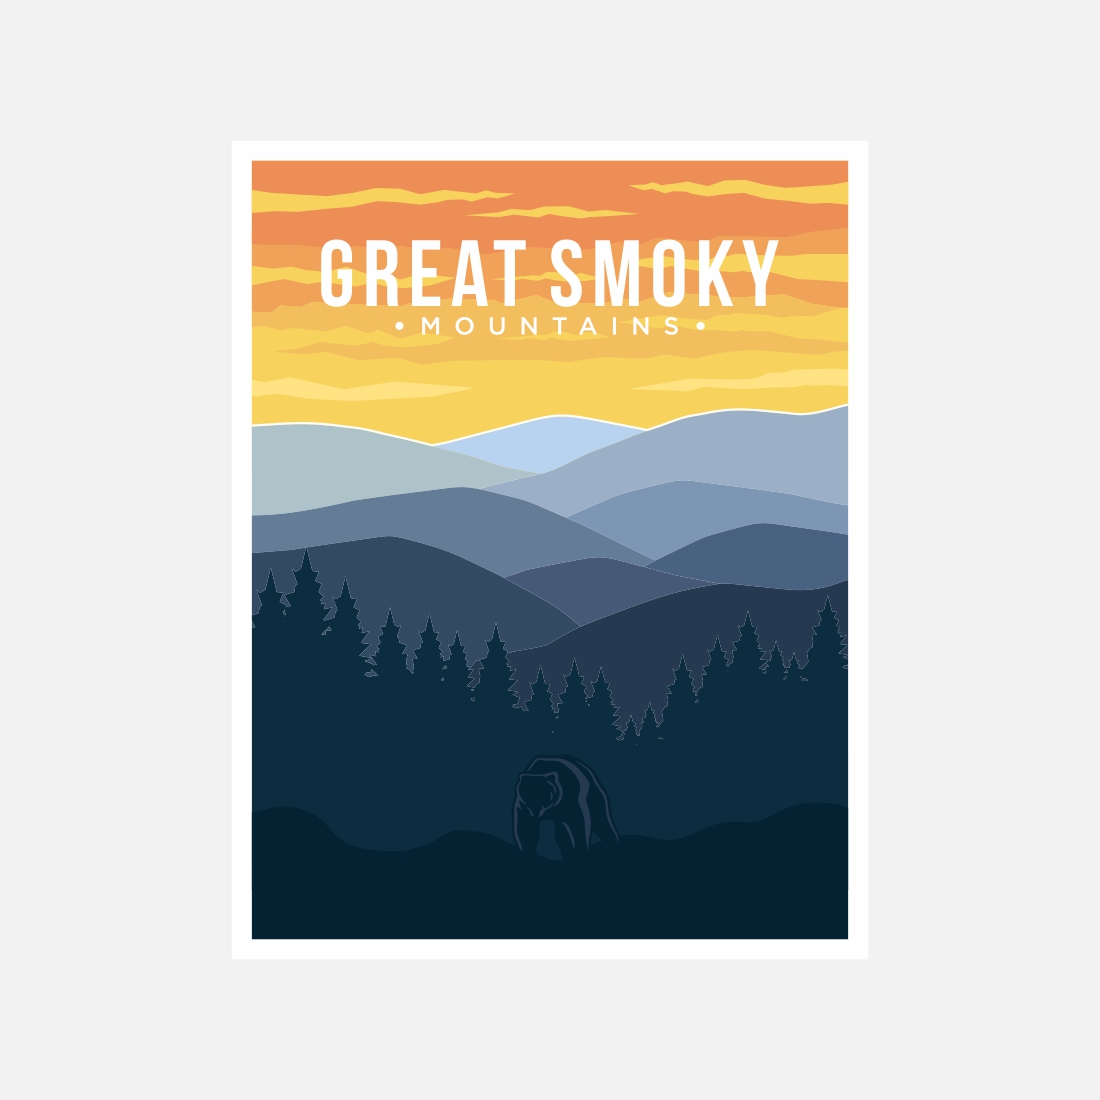 Great Smoky national park poster vector illustration design – Only $8 cover image.